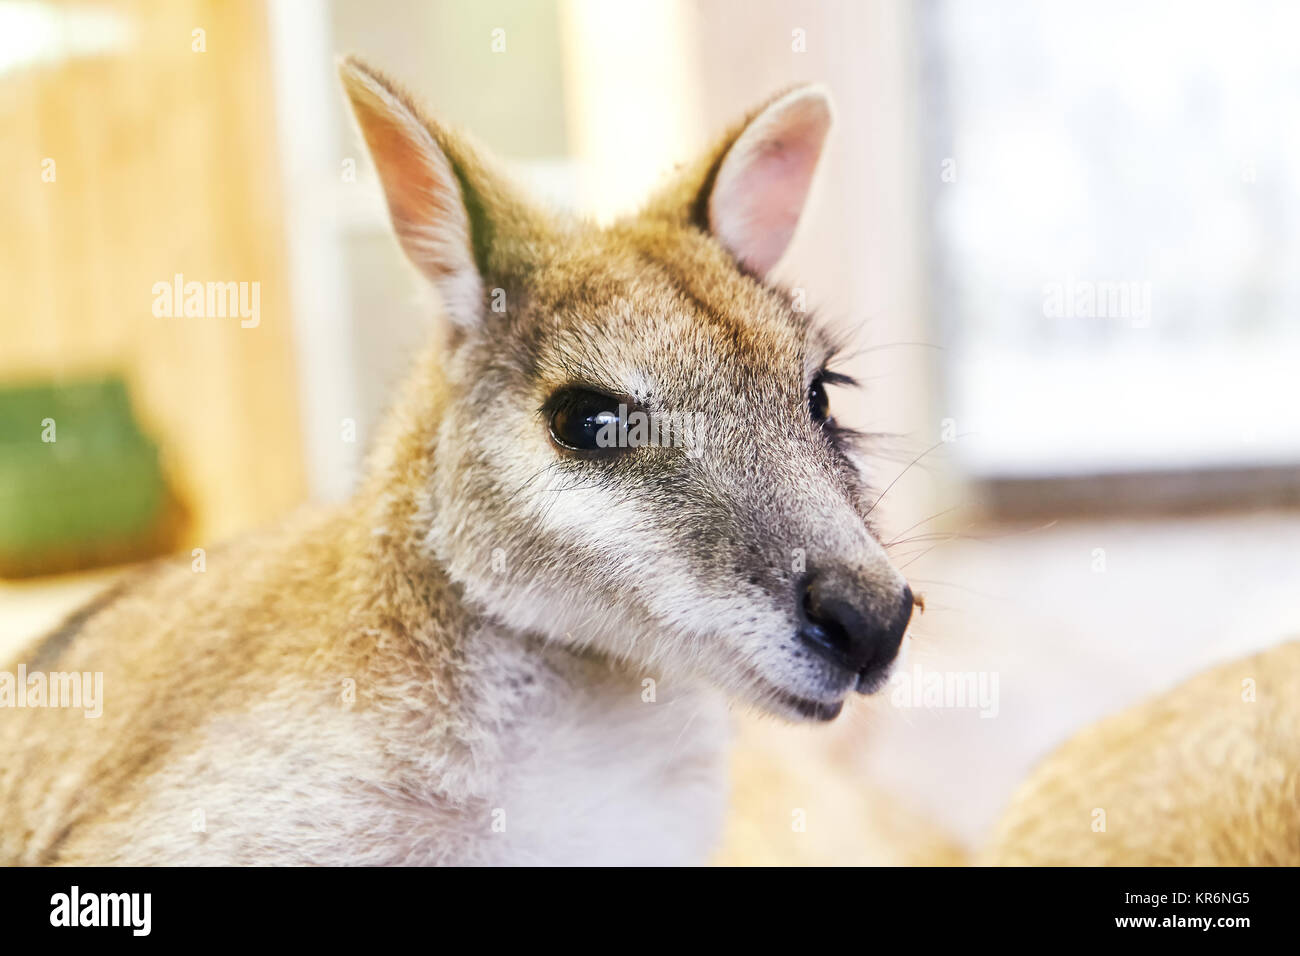 Agile wallaby (Macropus agilis) also known as the sandy wallaby Stock Photo